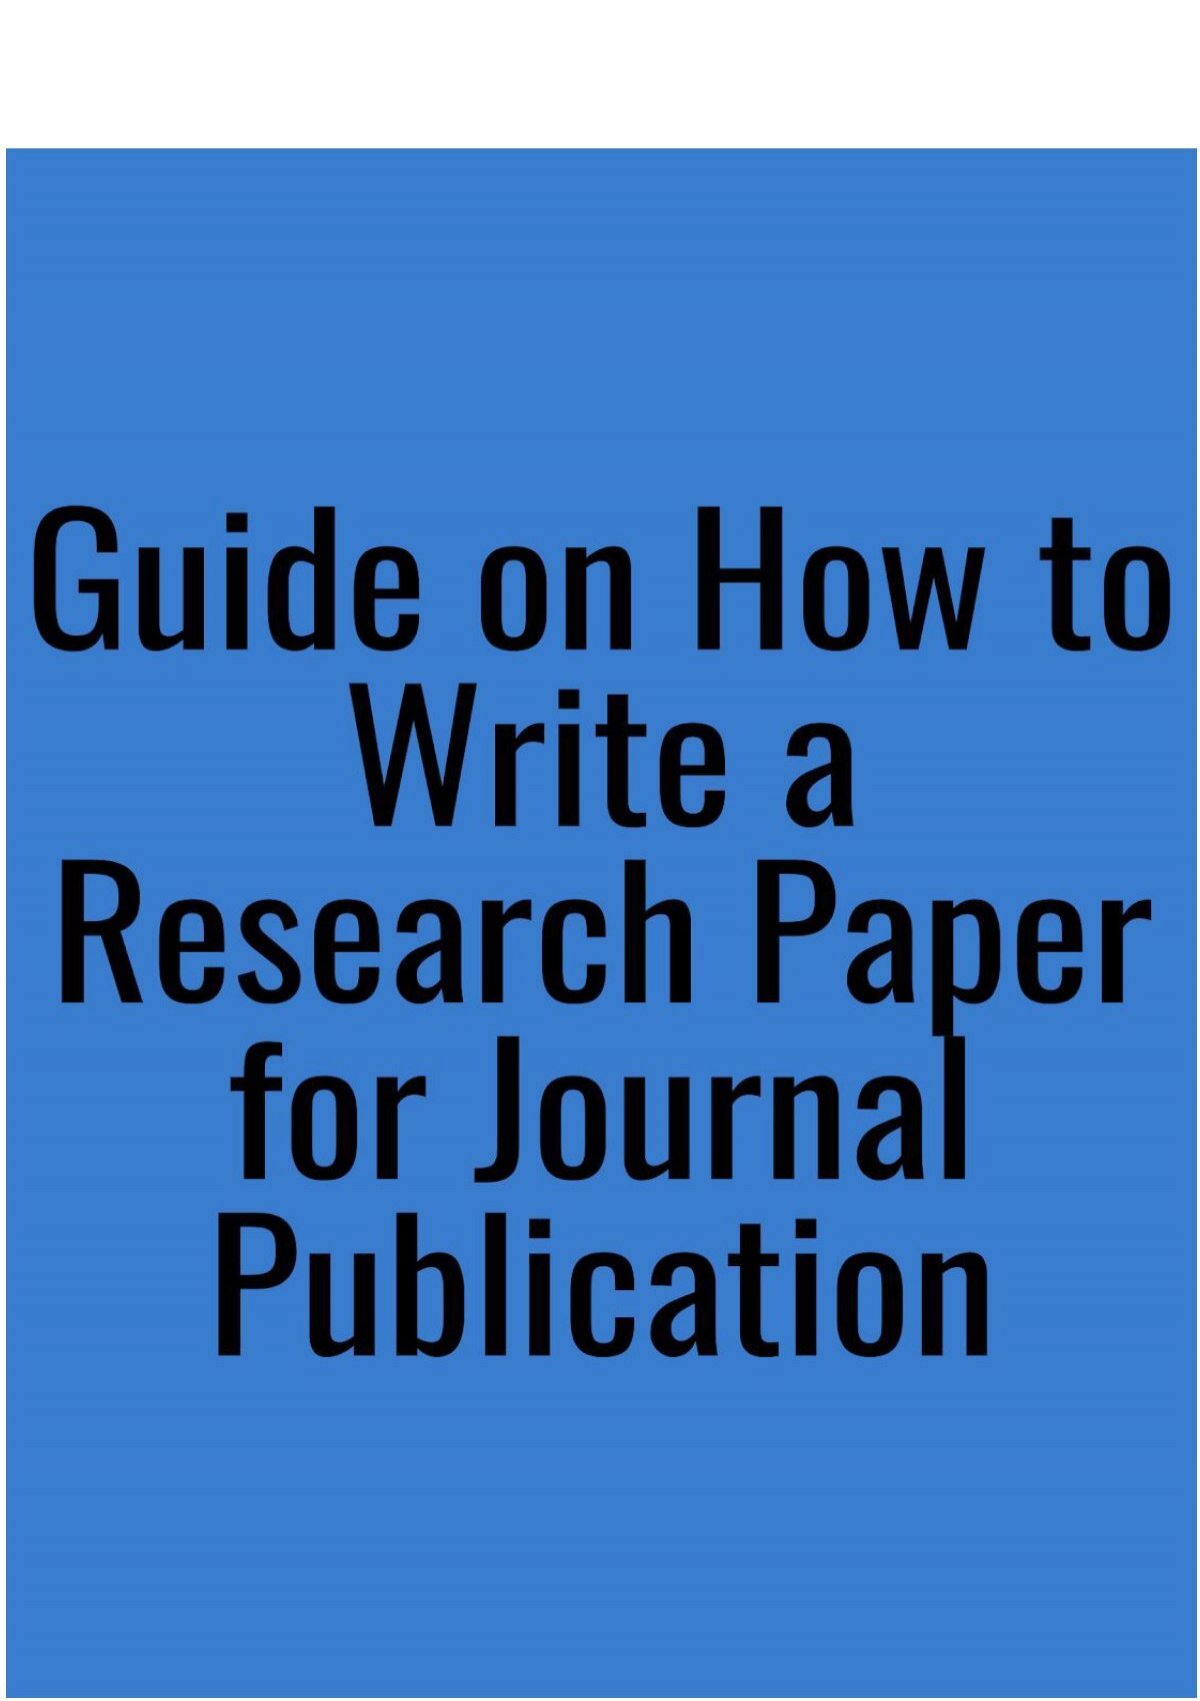 how to write a research paper for journal publication pdf